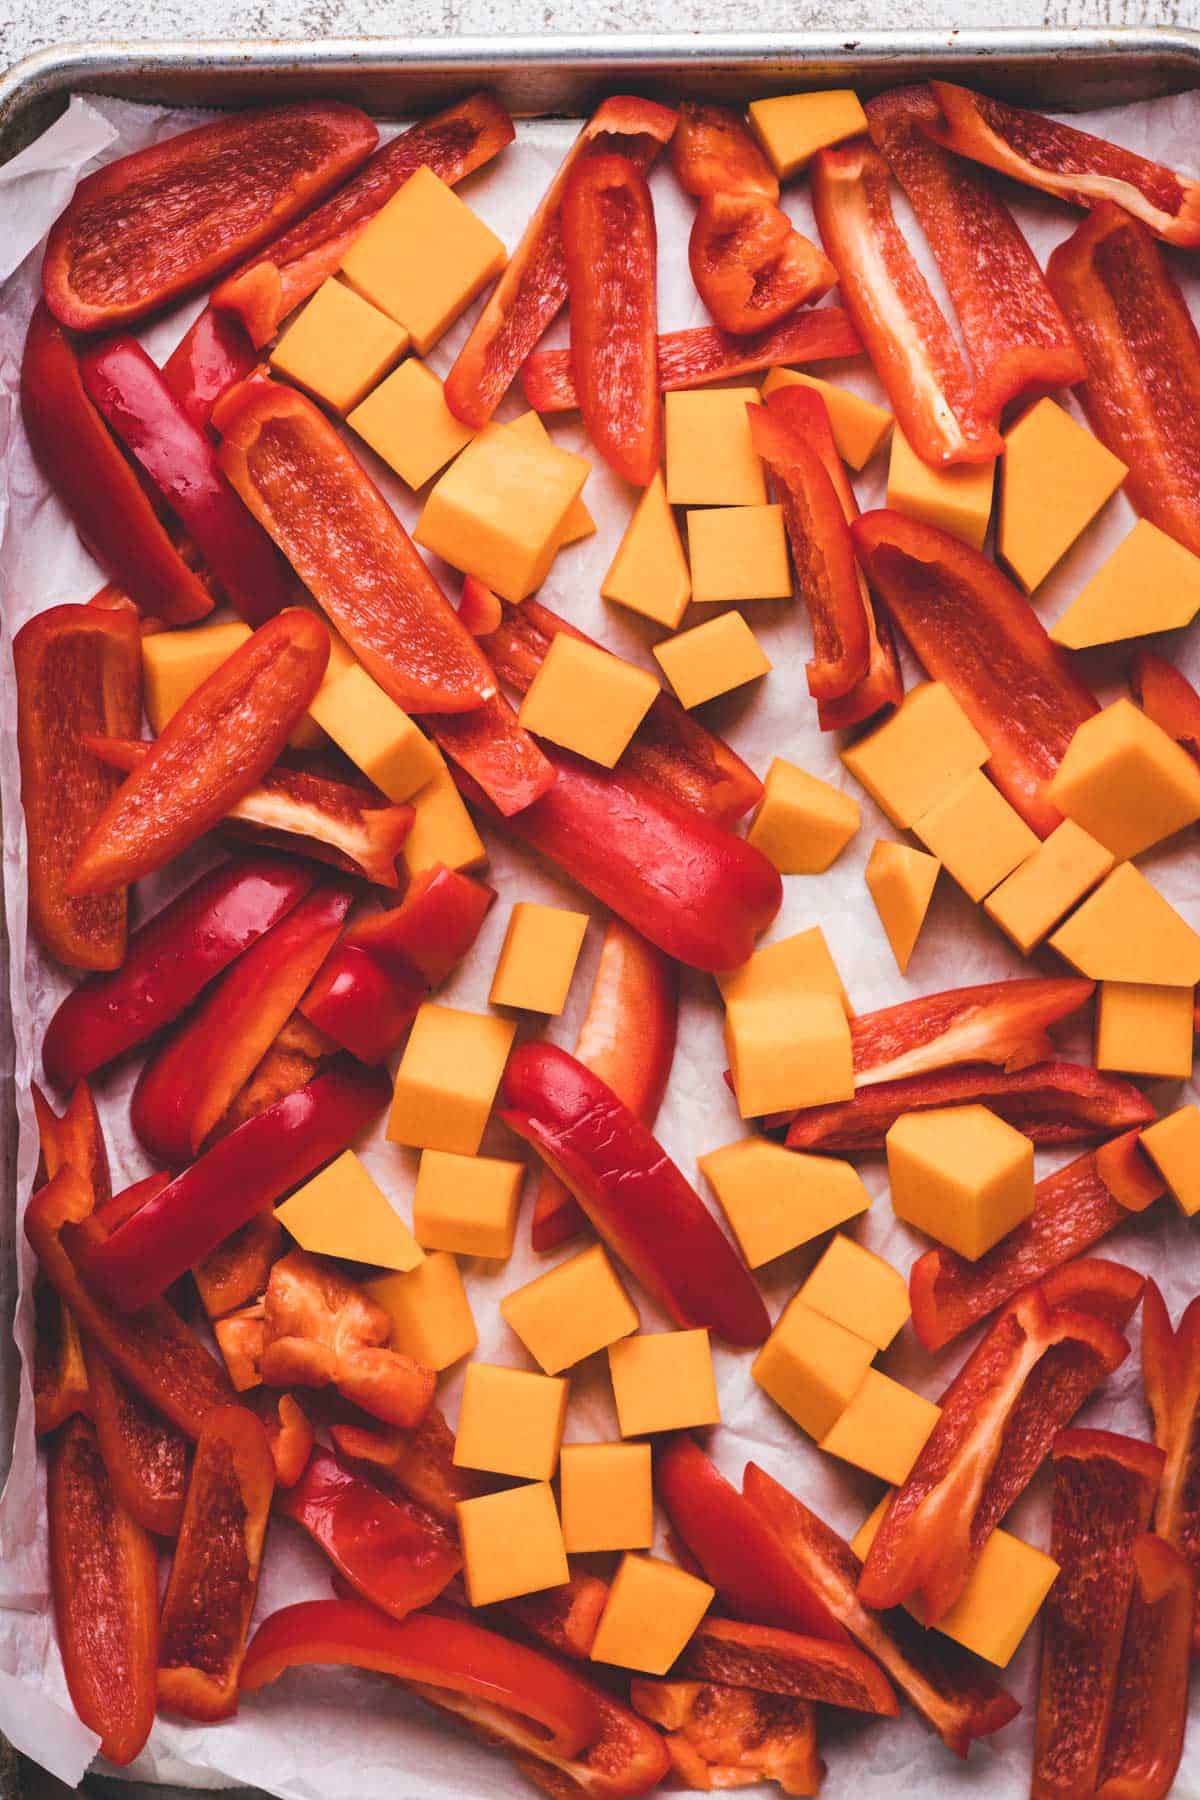 Roasting butternut squash and red peppers on baking tray.